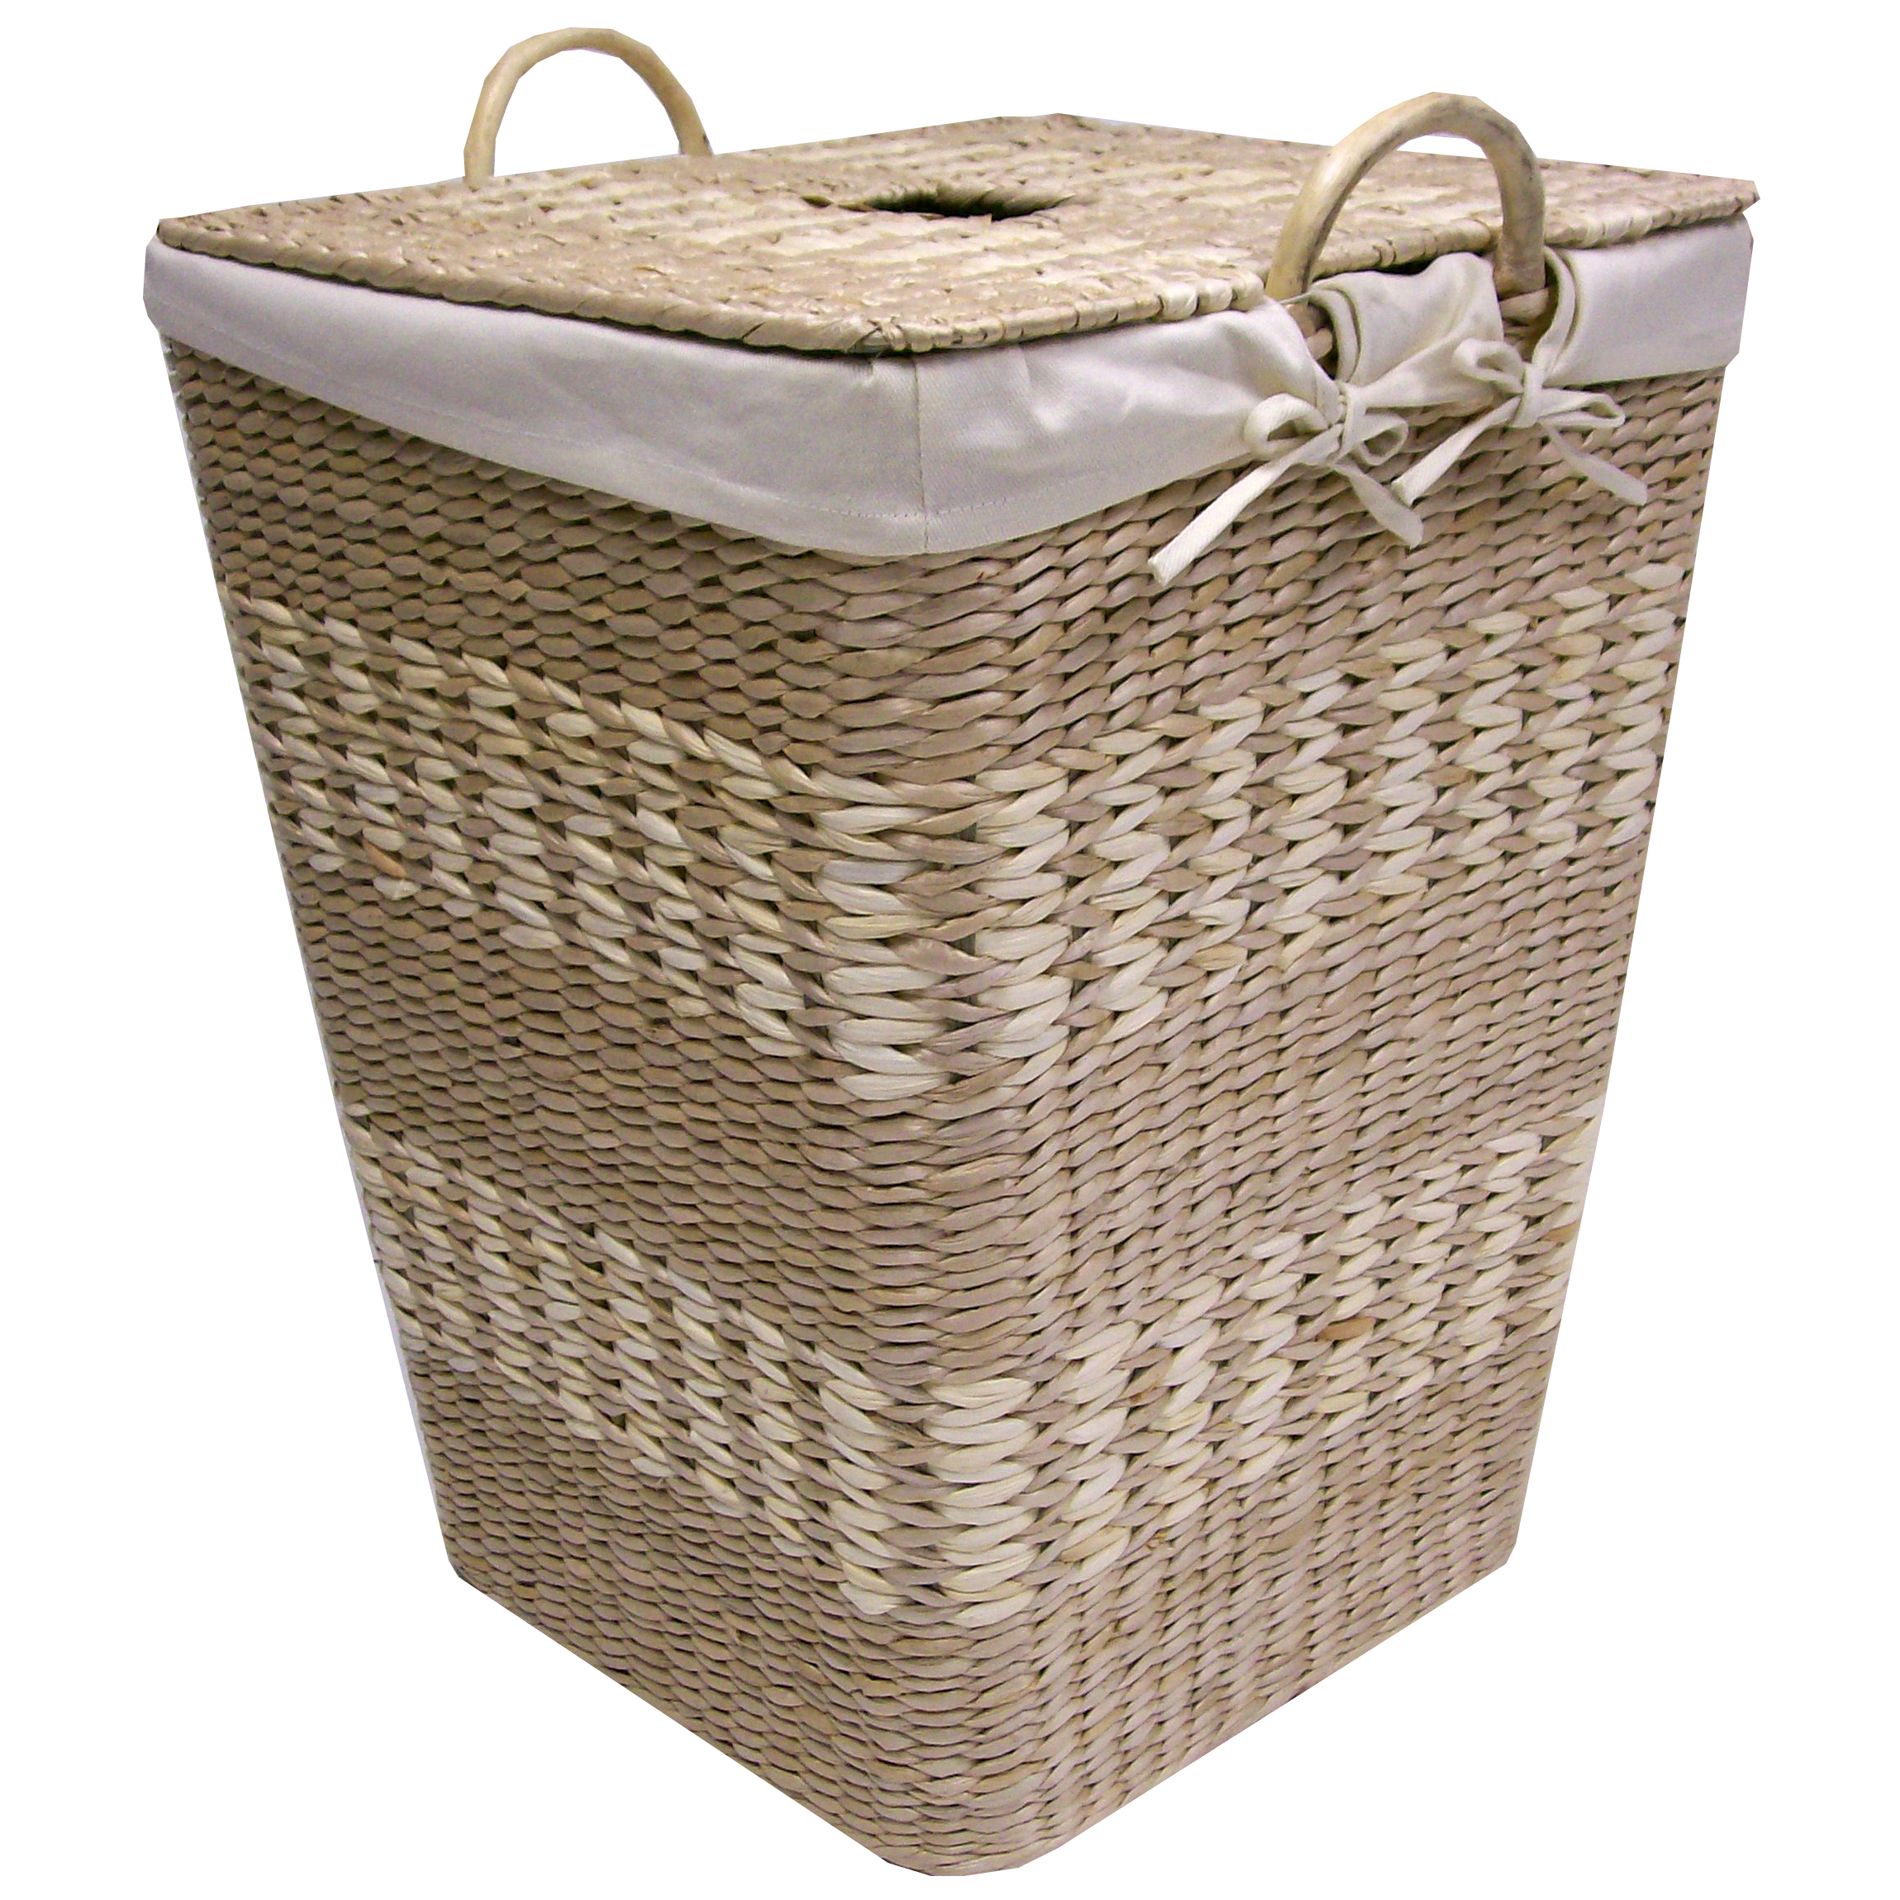 Arcadia Woven Clothes Hamper With Washable Liner—$19.99! (Reg $32.99)